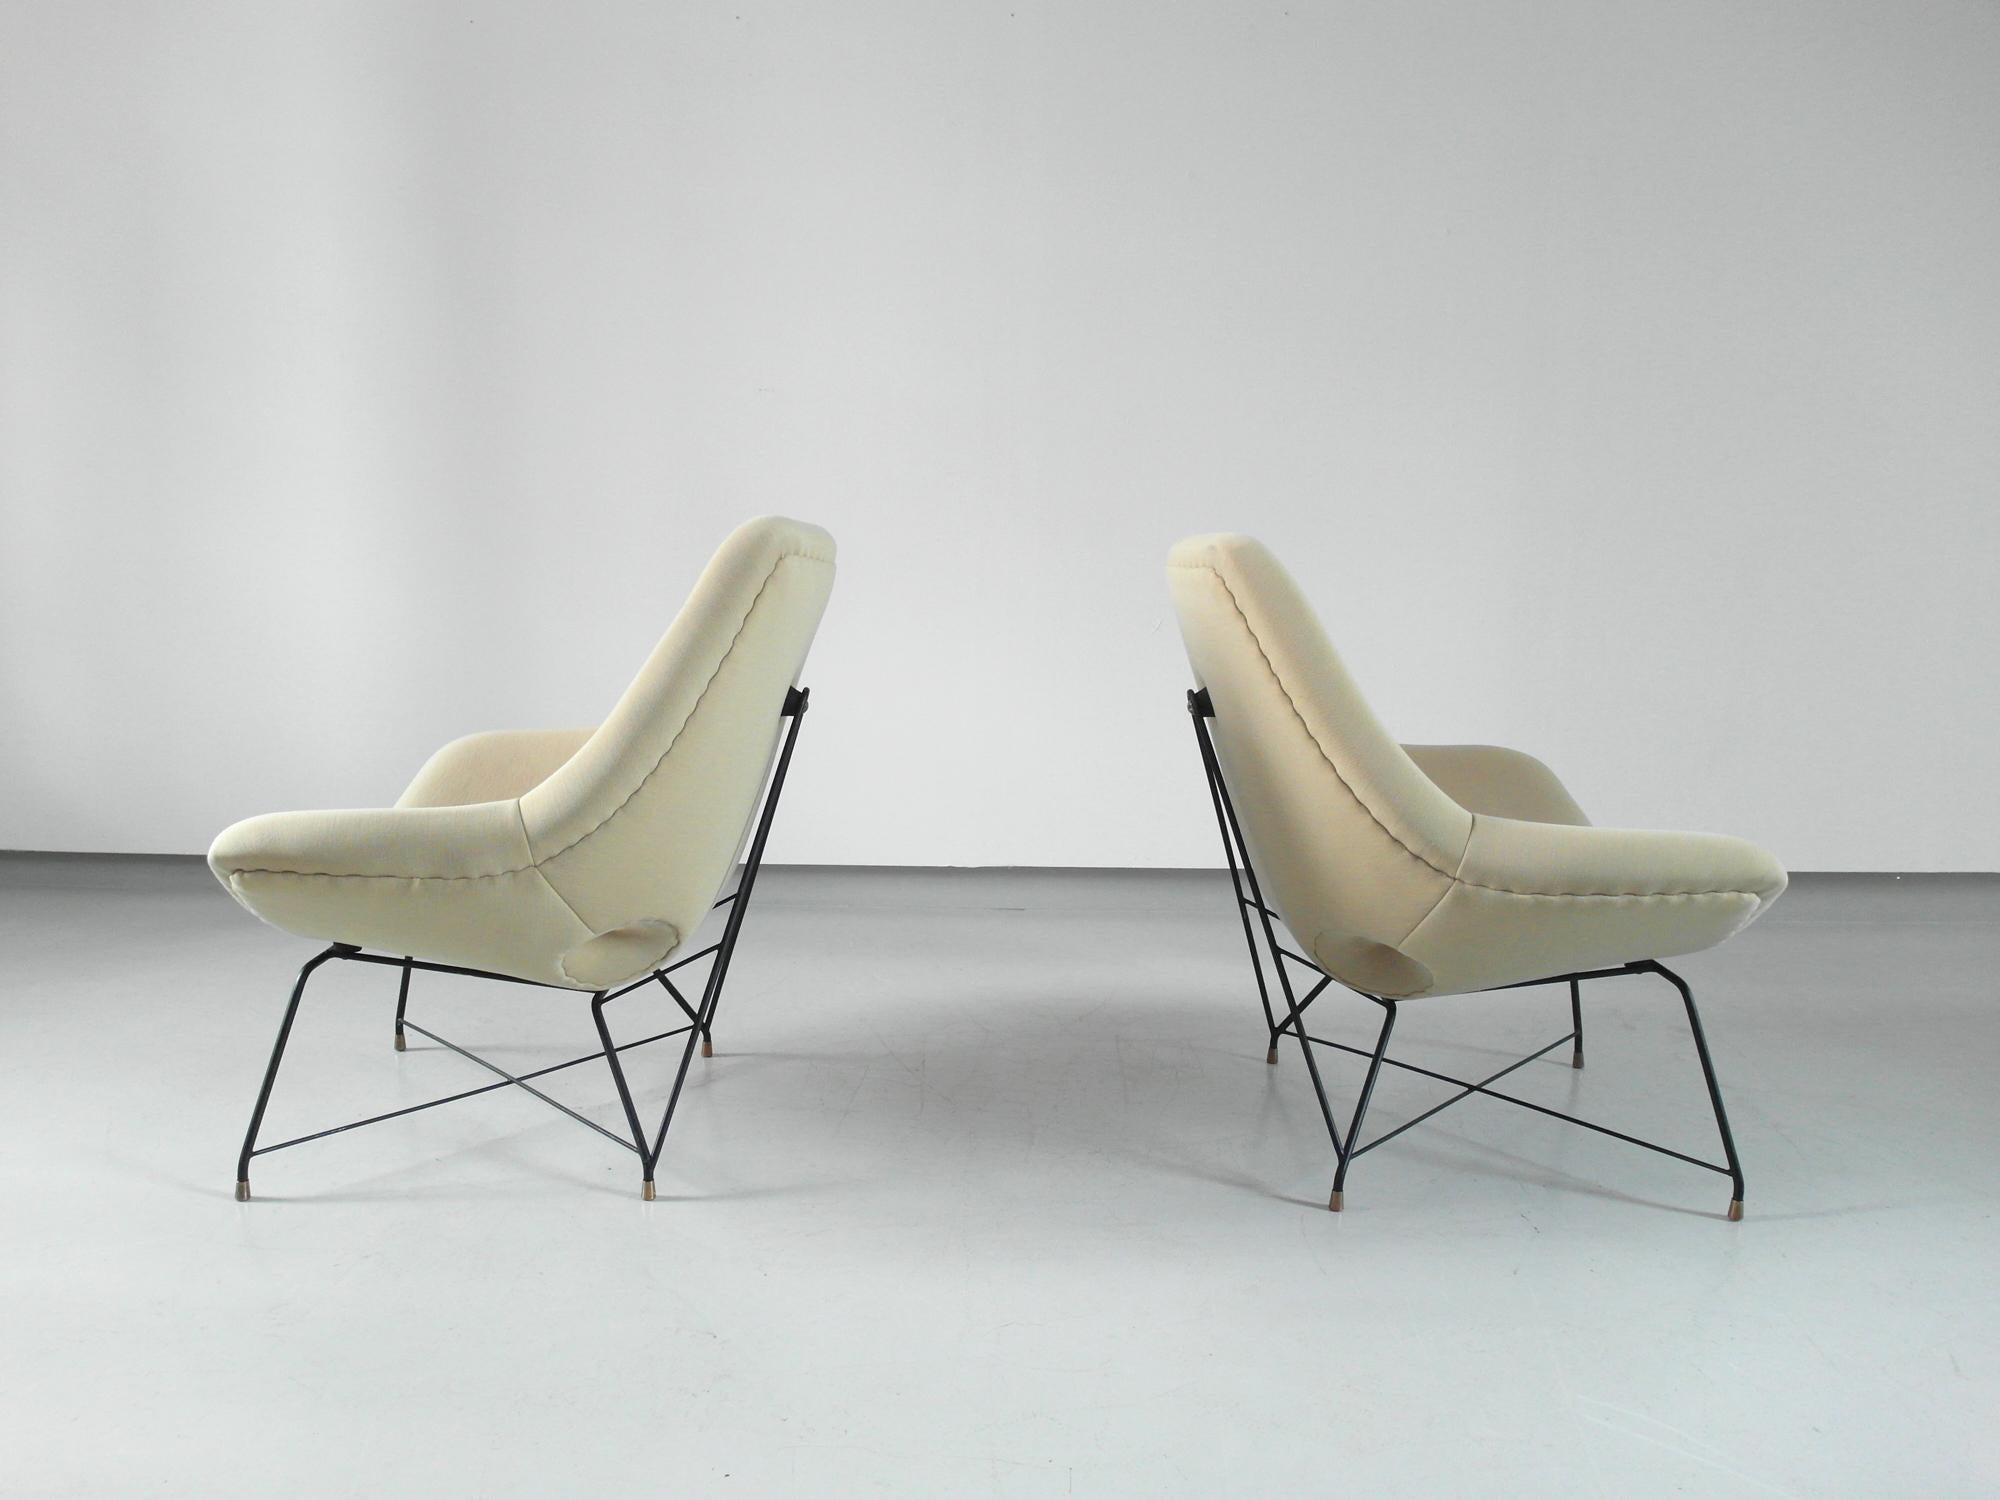 Mid-20th Century Sculptural Pair of Lounge Chairs by Augusto Bozzi for Saporiti, Italy, 1954 For Sale